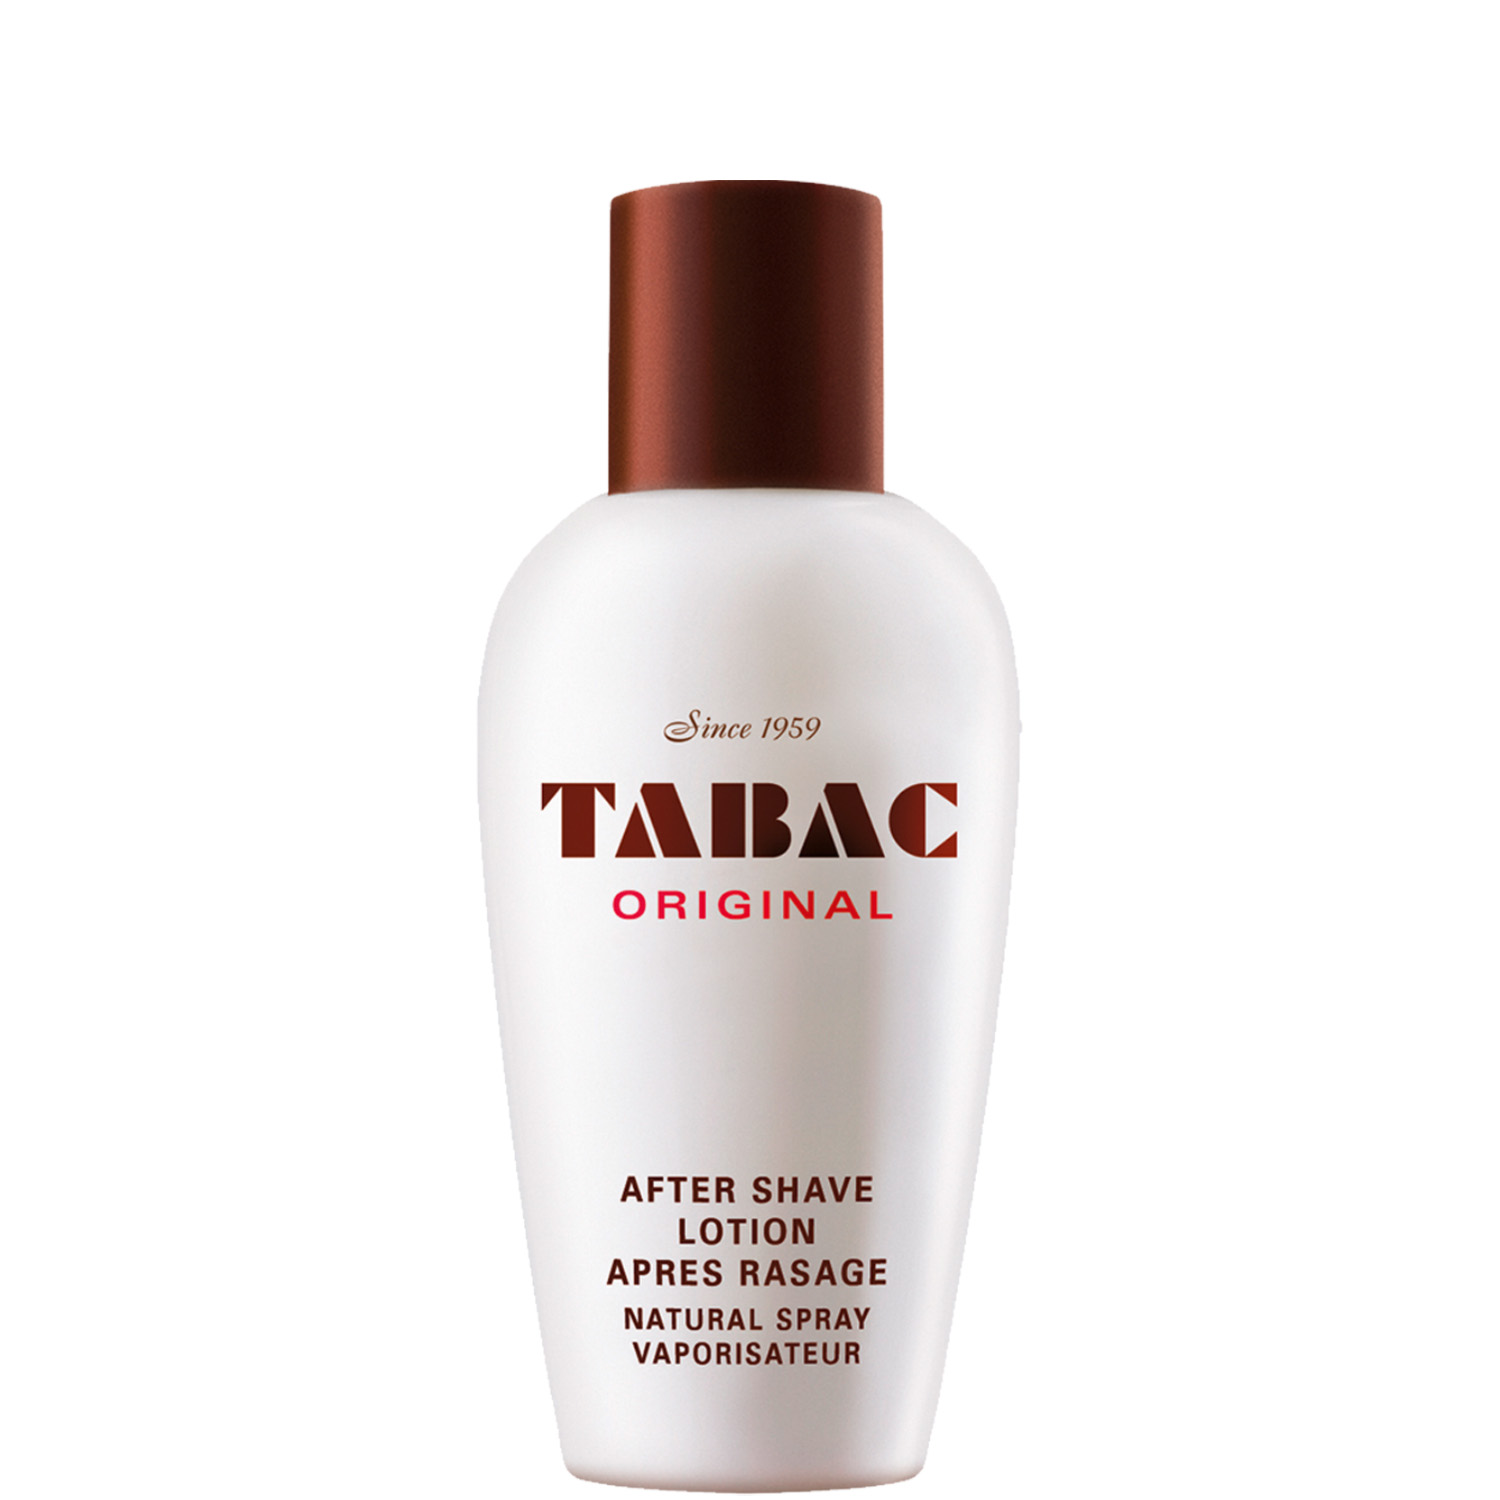 Tabac Original After Shave Lotion Natural Spray